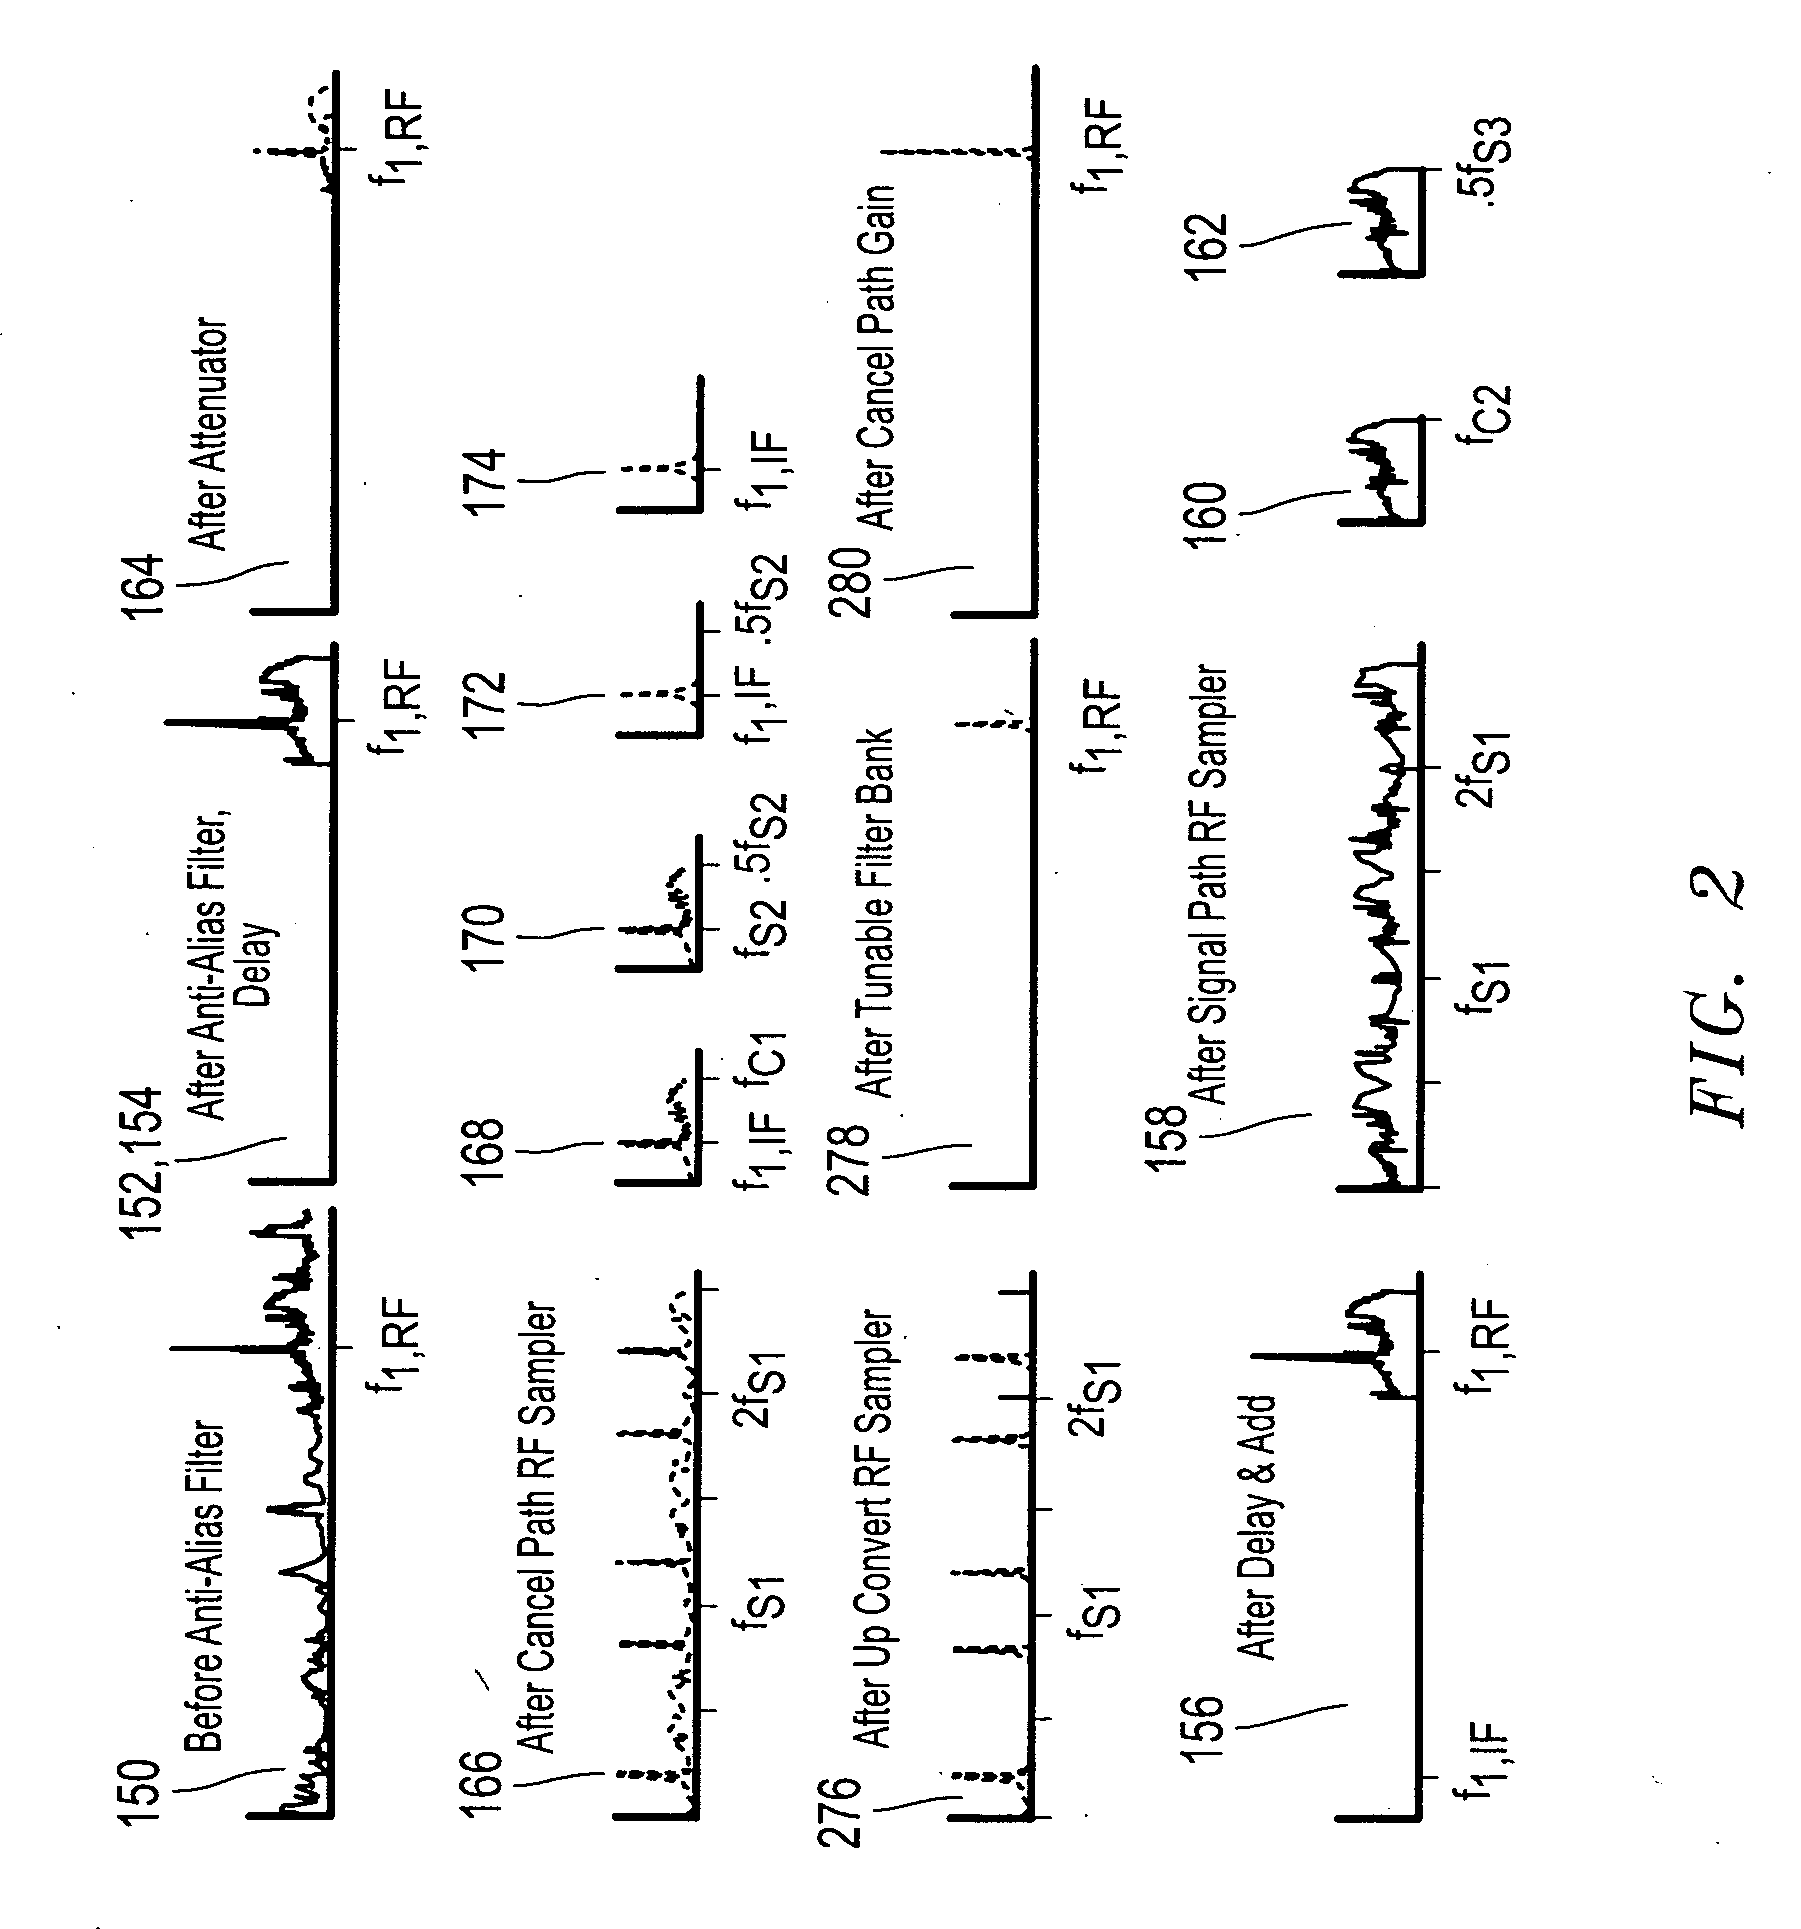 Interference cancellation for reconfigurable direct RF bandpass sampling interference cancellation